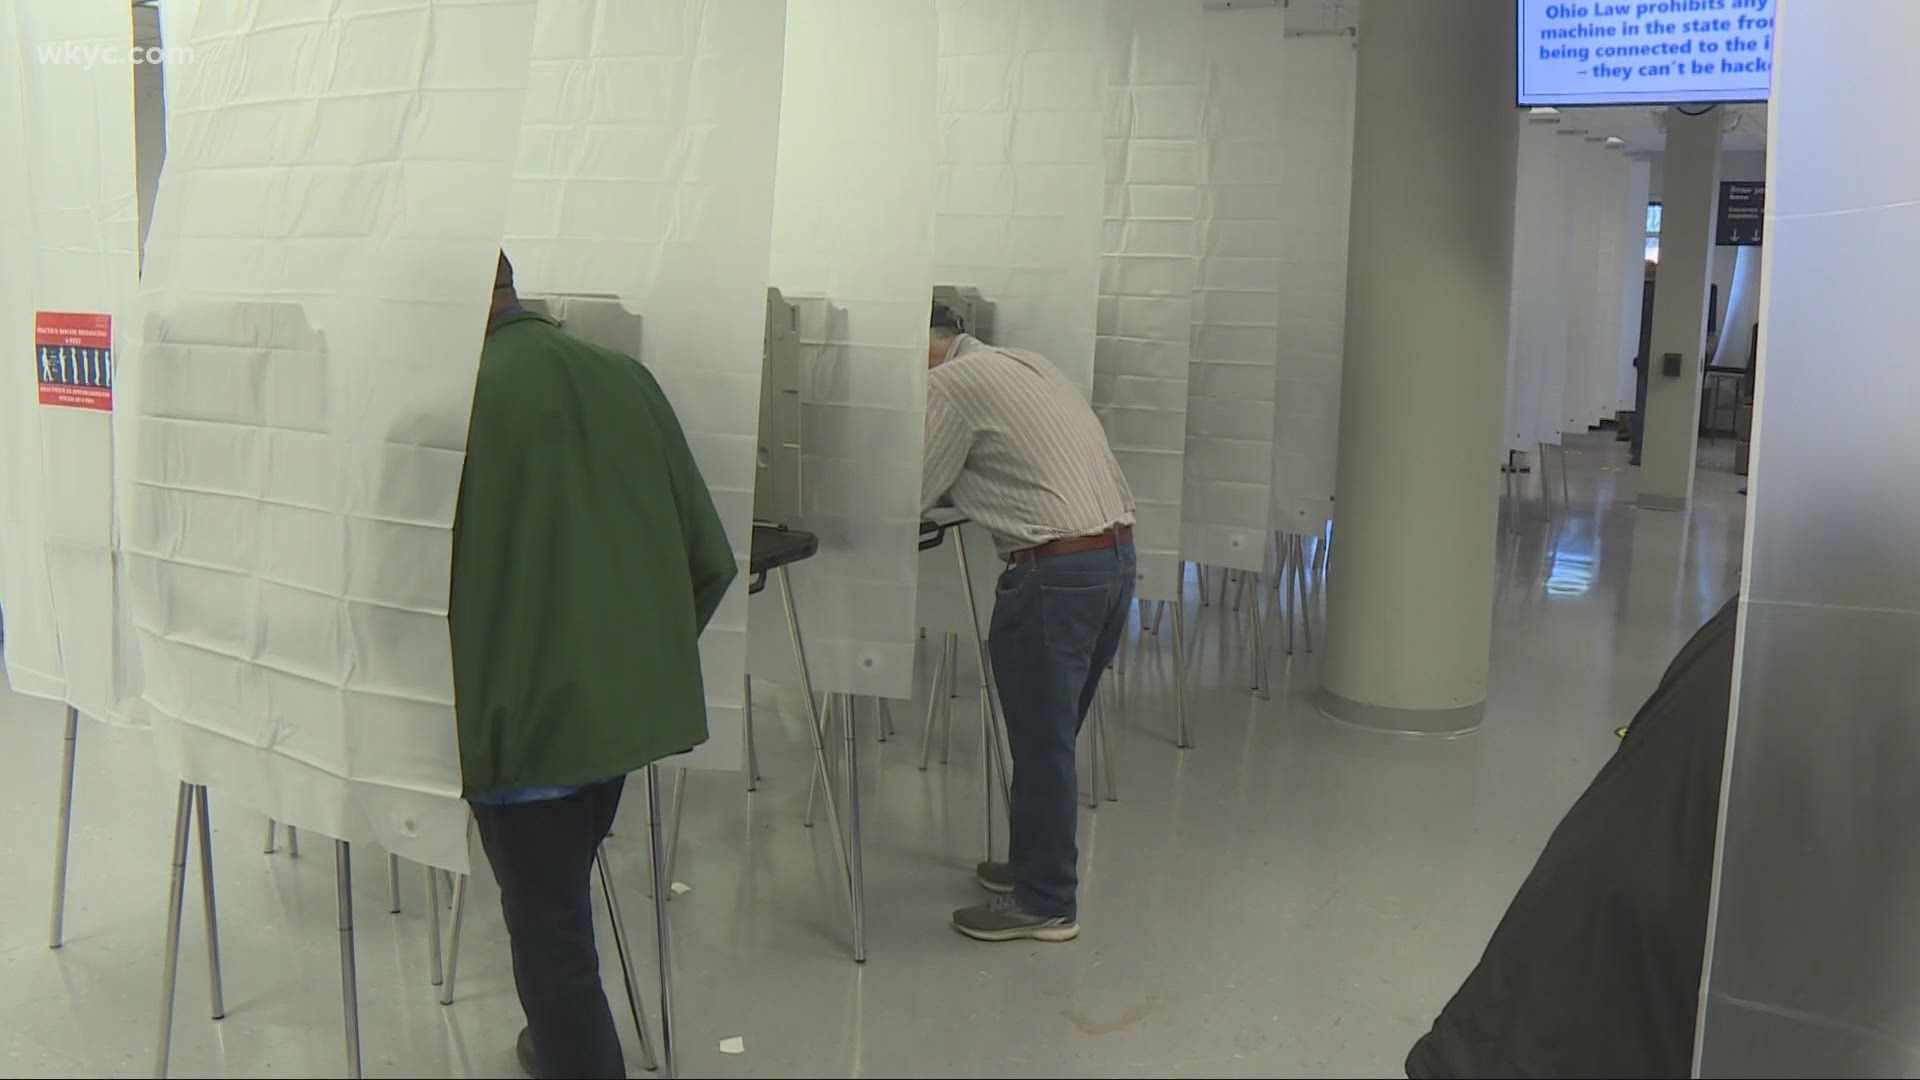 We're just 28 days from election day and today, Ohioans lined up at boards of election locations across the state for early voting. Romney Smith reports.